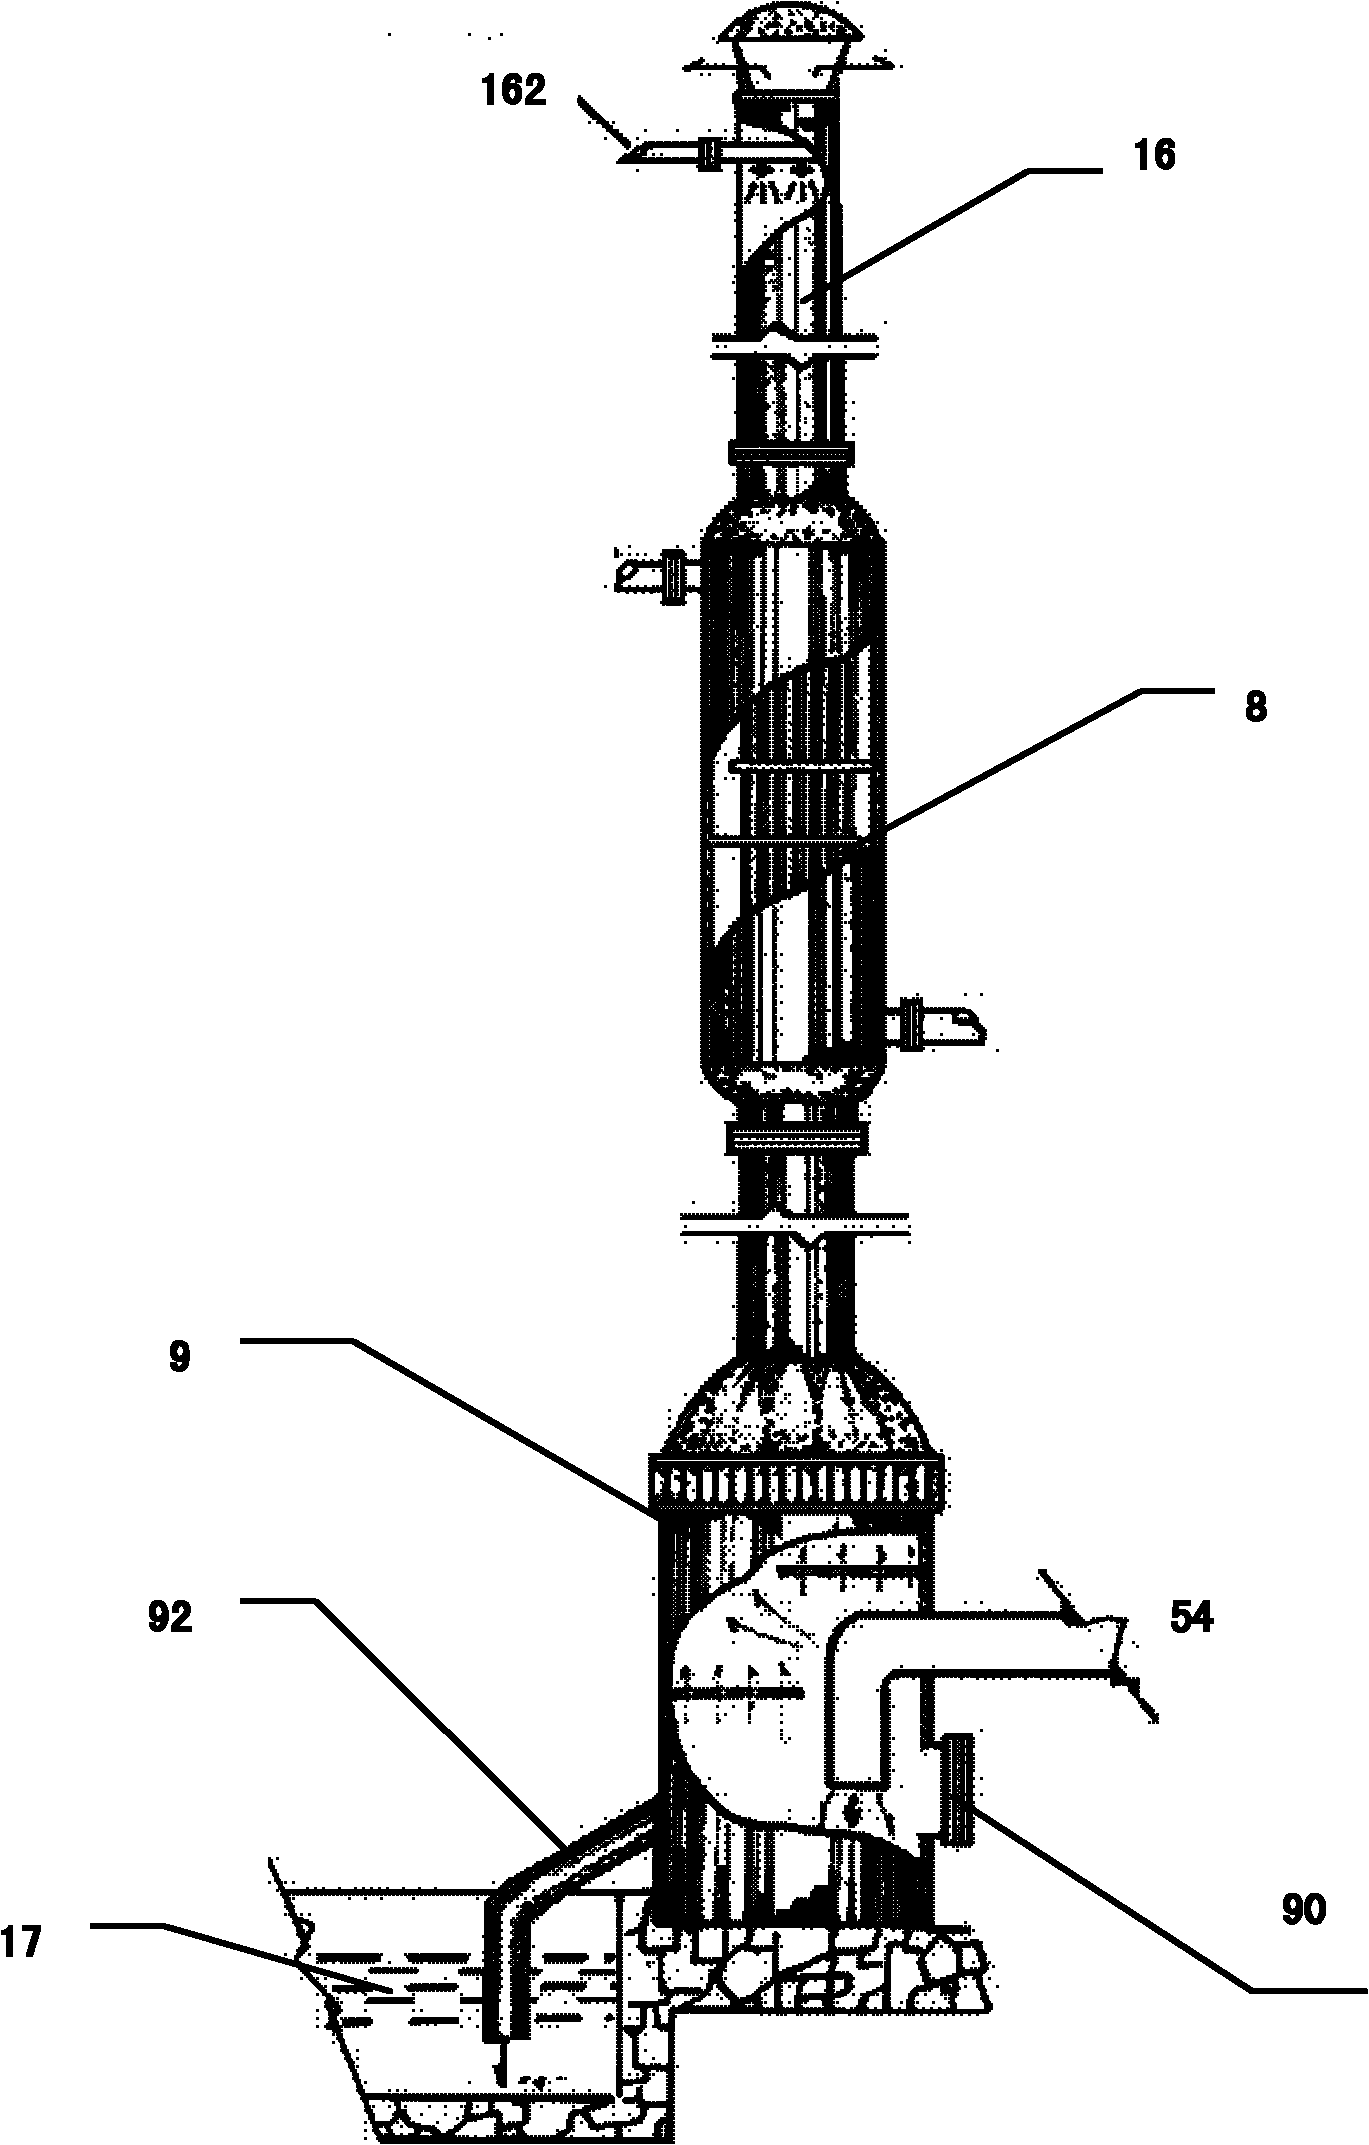 Tail gas treatment system for through which